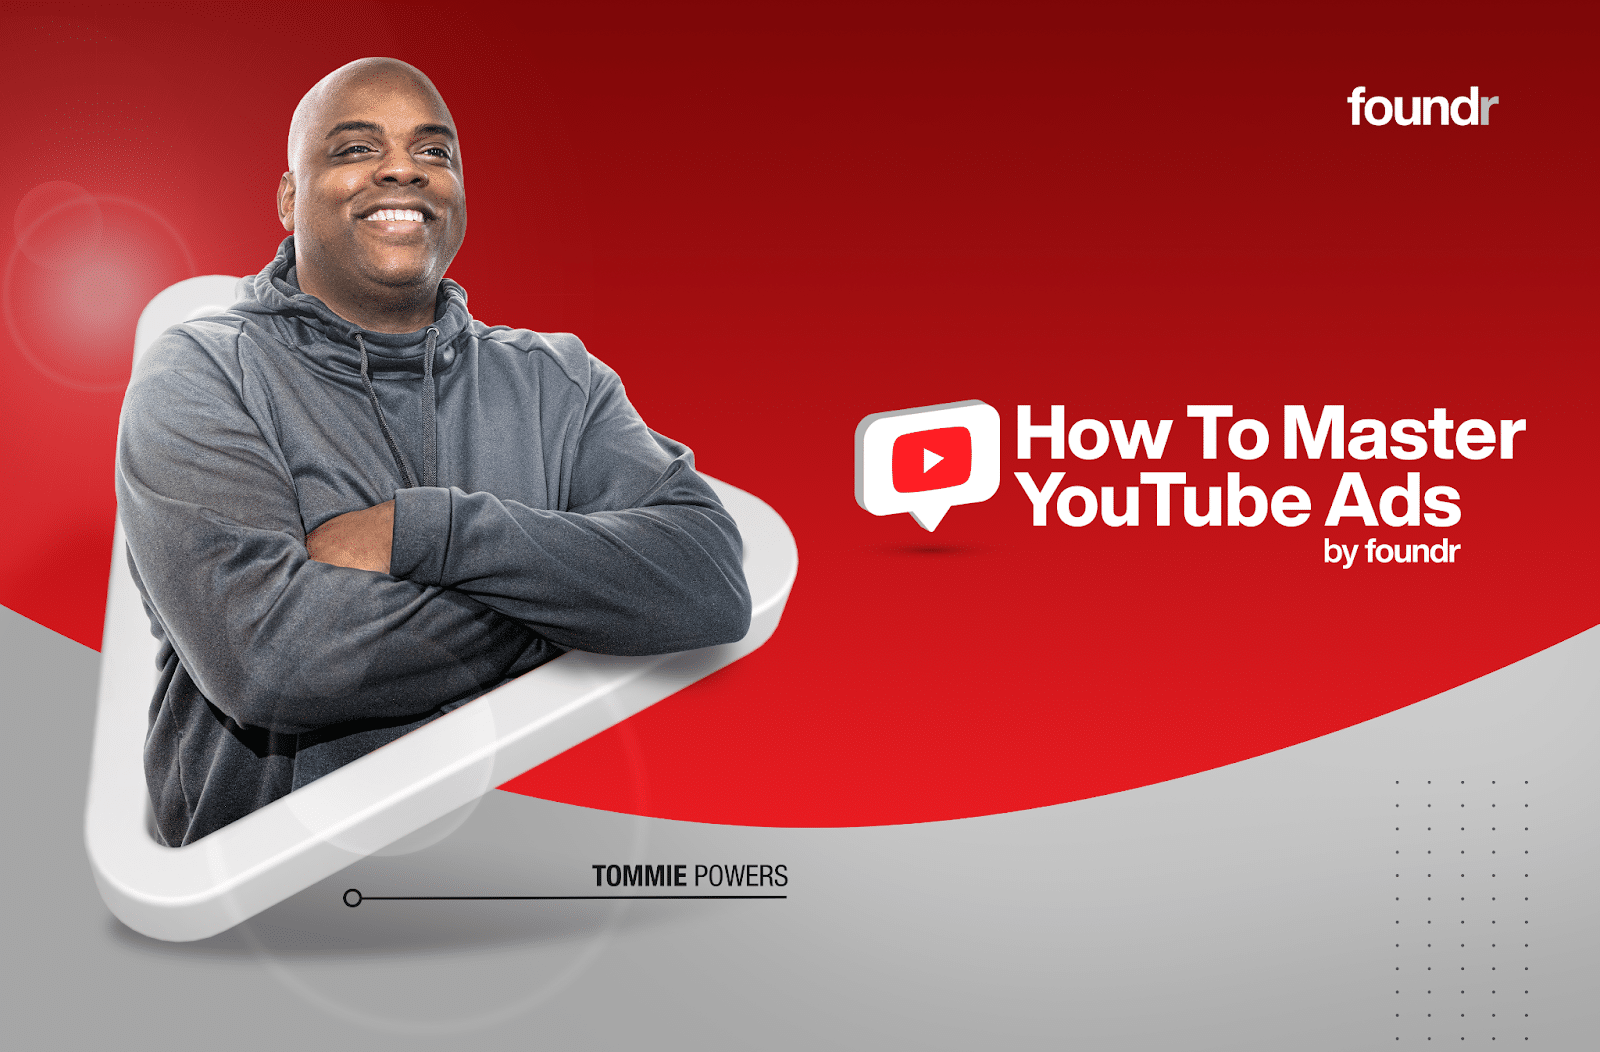 Tommie Powers Foundr - How To Master YouTube Ads